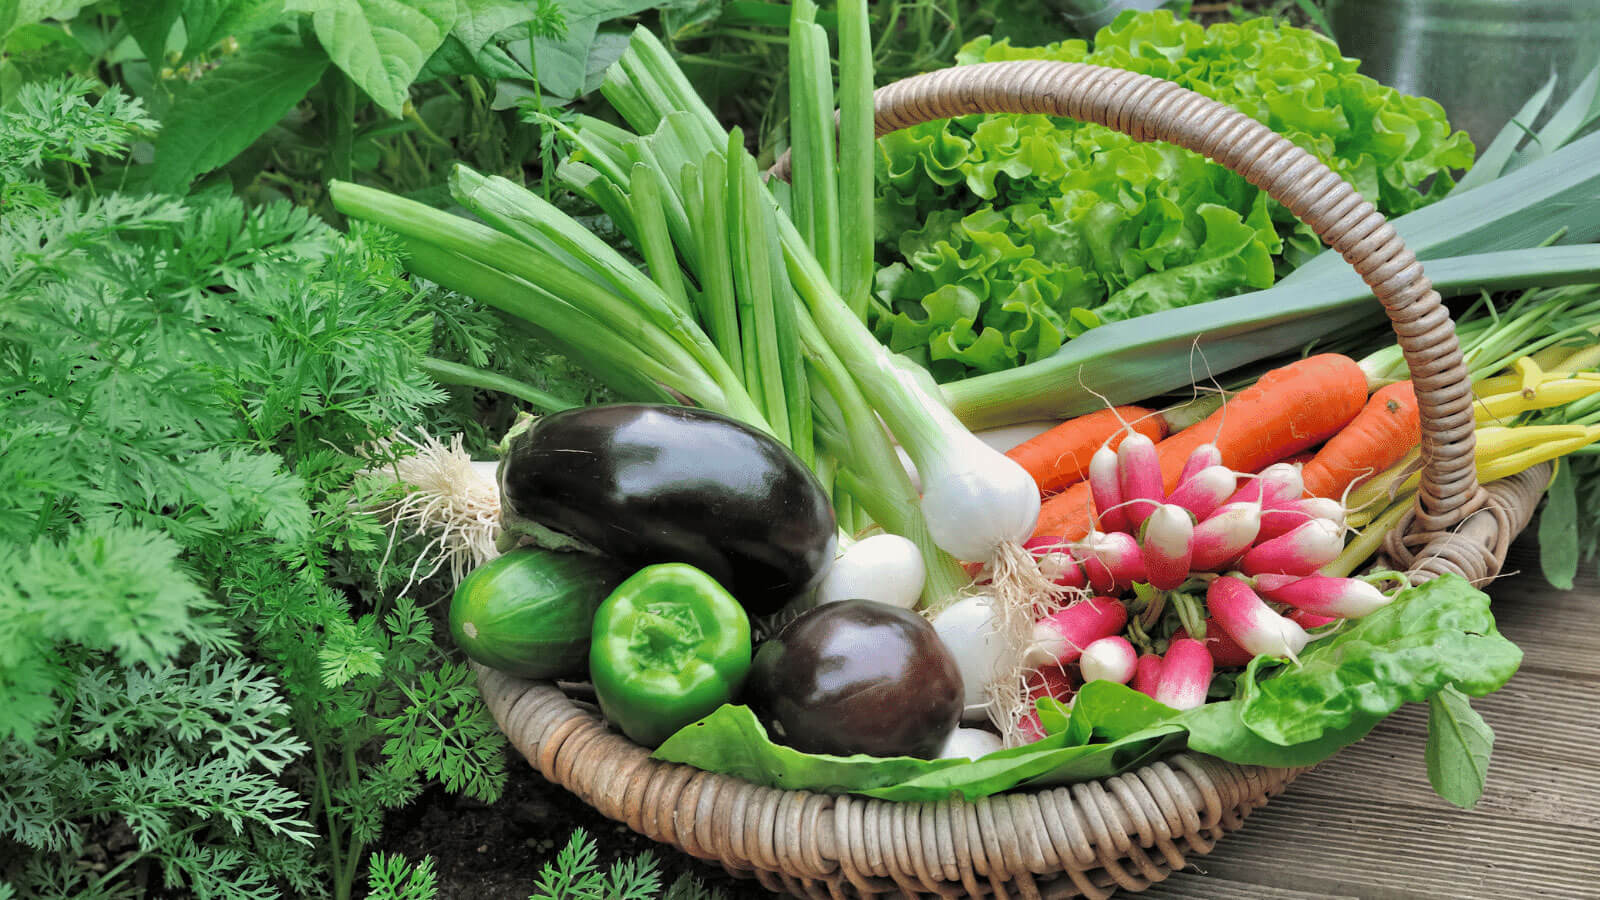 variety of vegetables grown in a garden